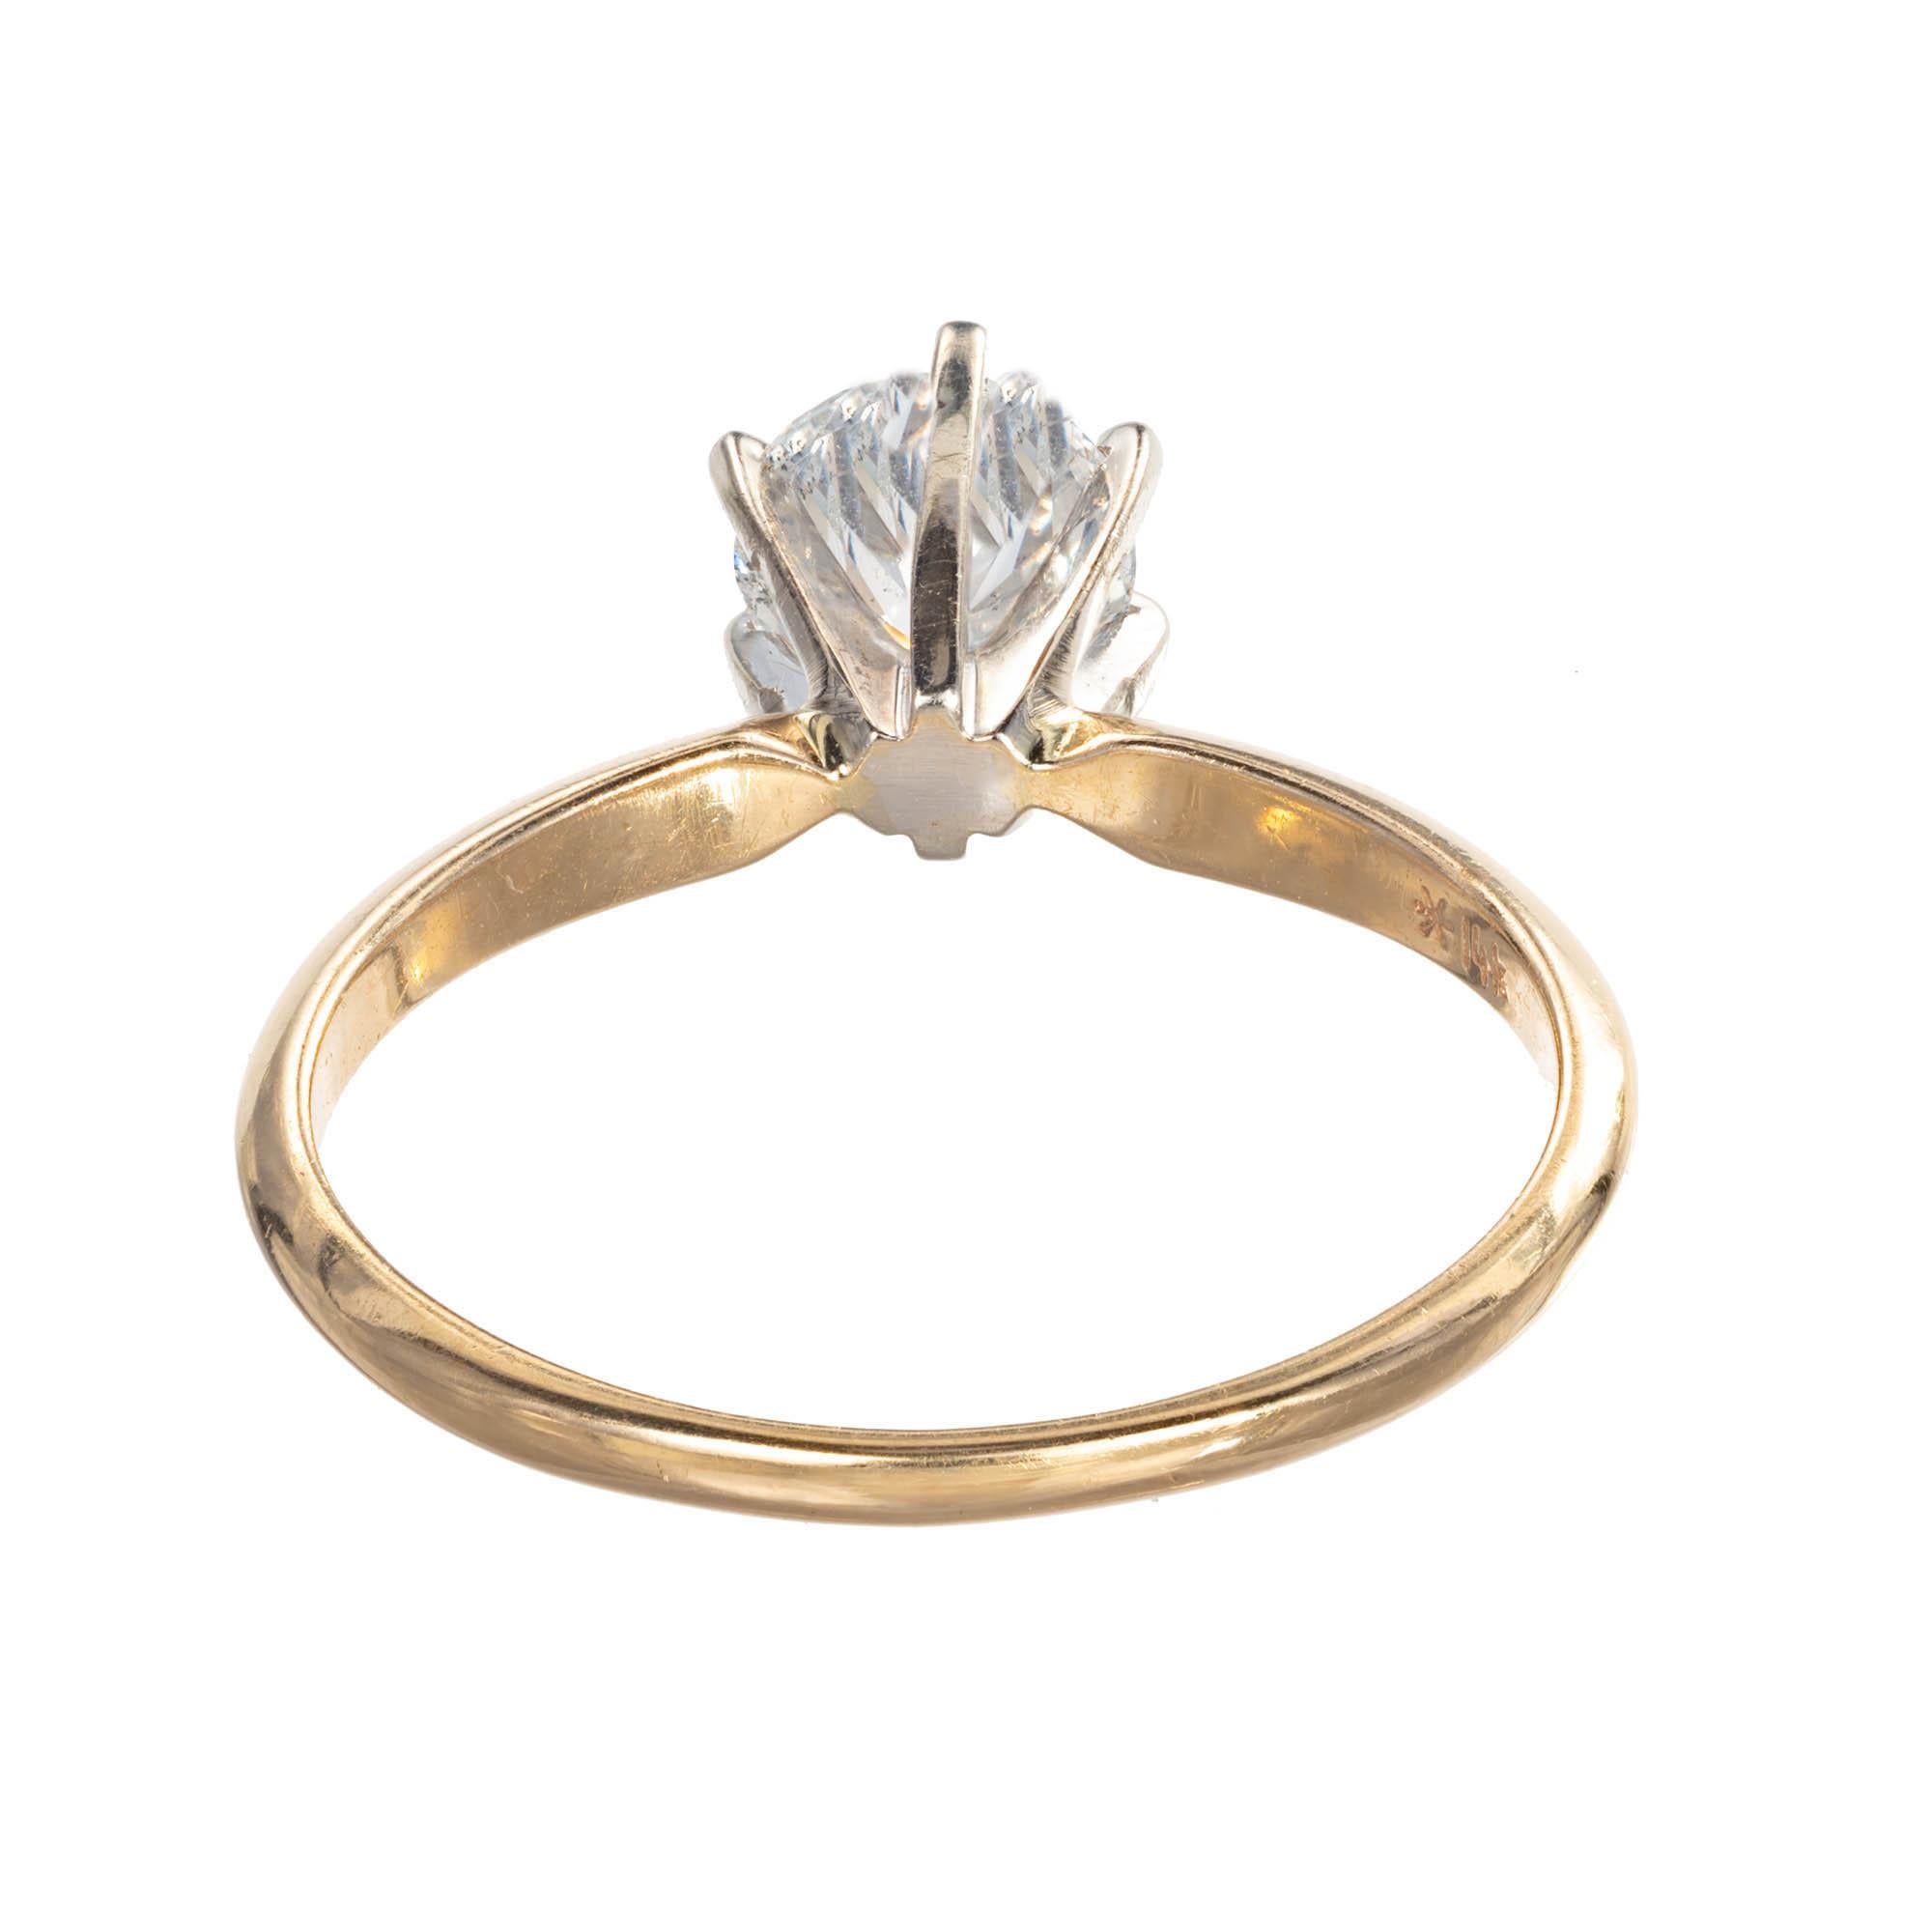 Diamond engagement solitaire engagement ring. round brilliant cut Diamond set in a 6 prong 14k white gold settings on a 14k yellow gold band.

1 round brilliant cut Diamond, approx. total weight .90cts, F – G, I1, 5.94 x 5.93 x 4.0mm, EGL